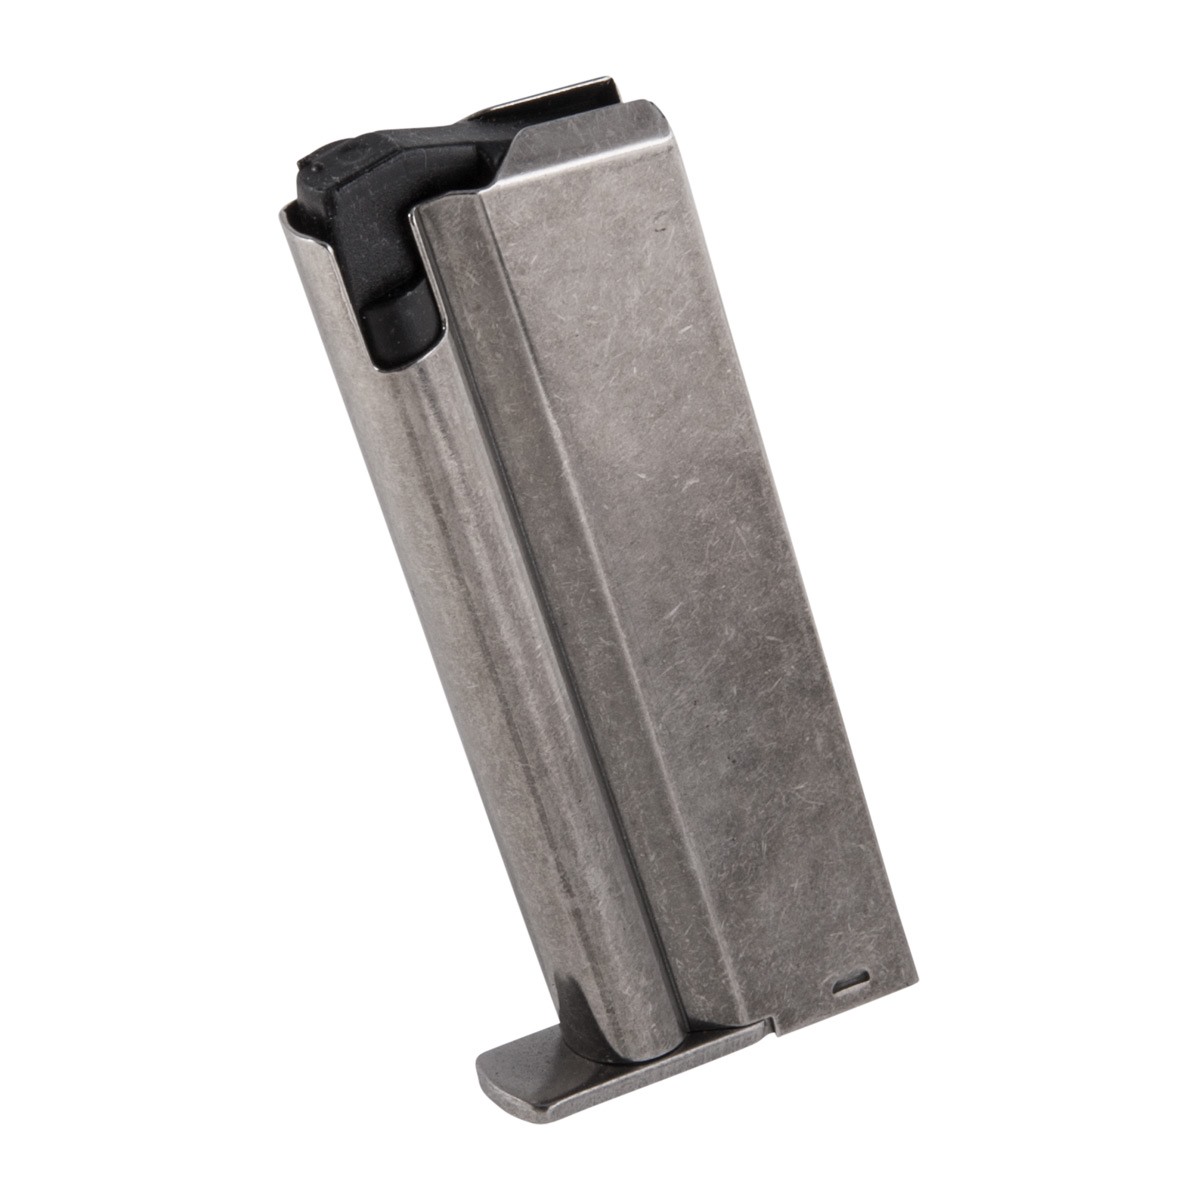 AMT Automag II 22 Magnum 9rd Stainless Factory Magazine for sale online 